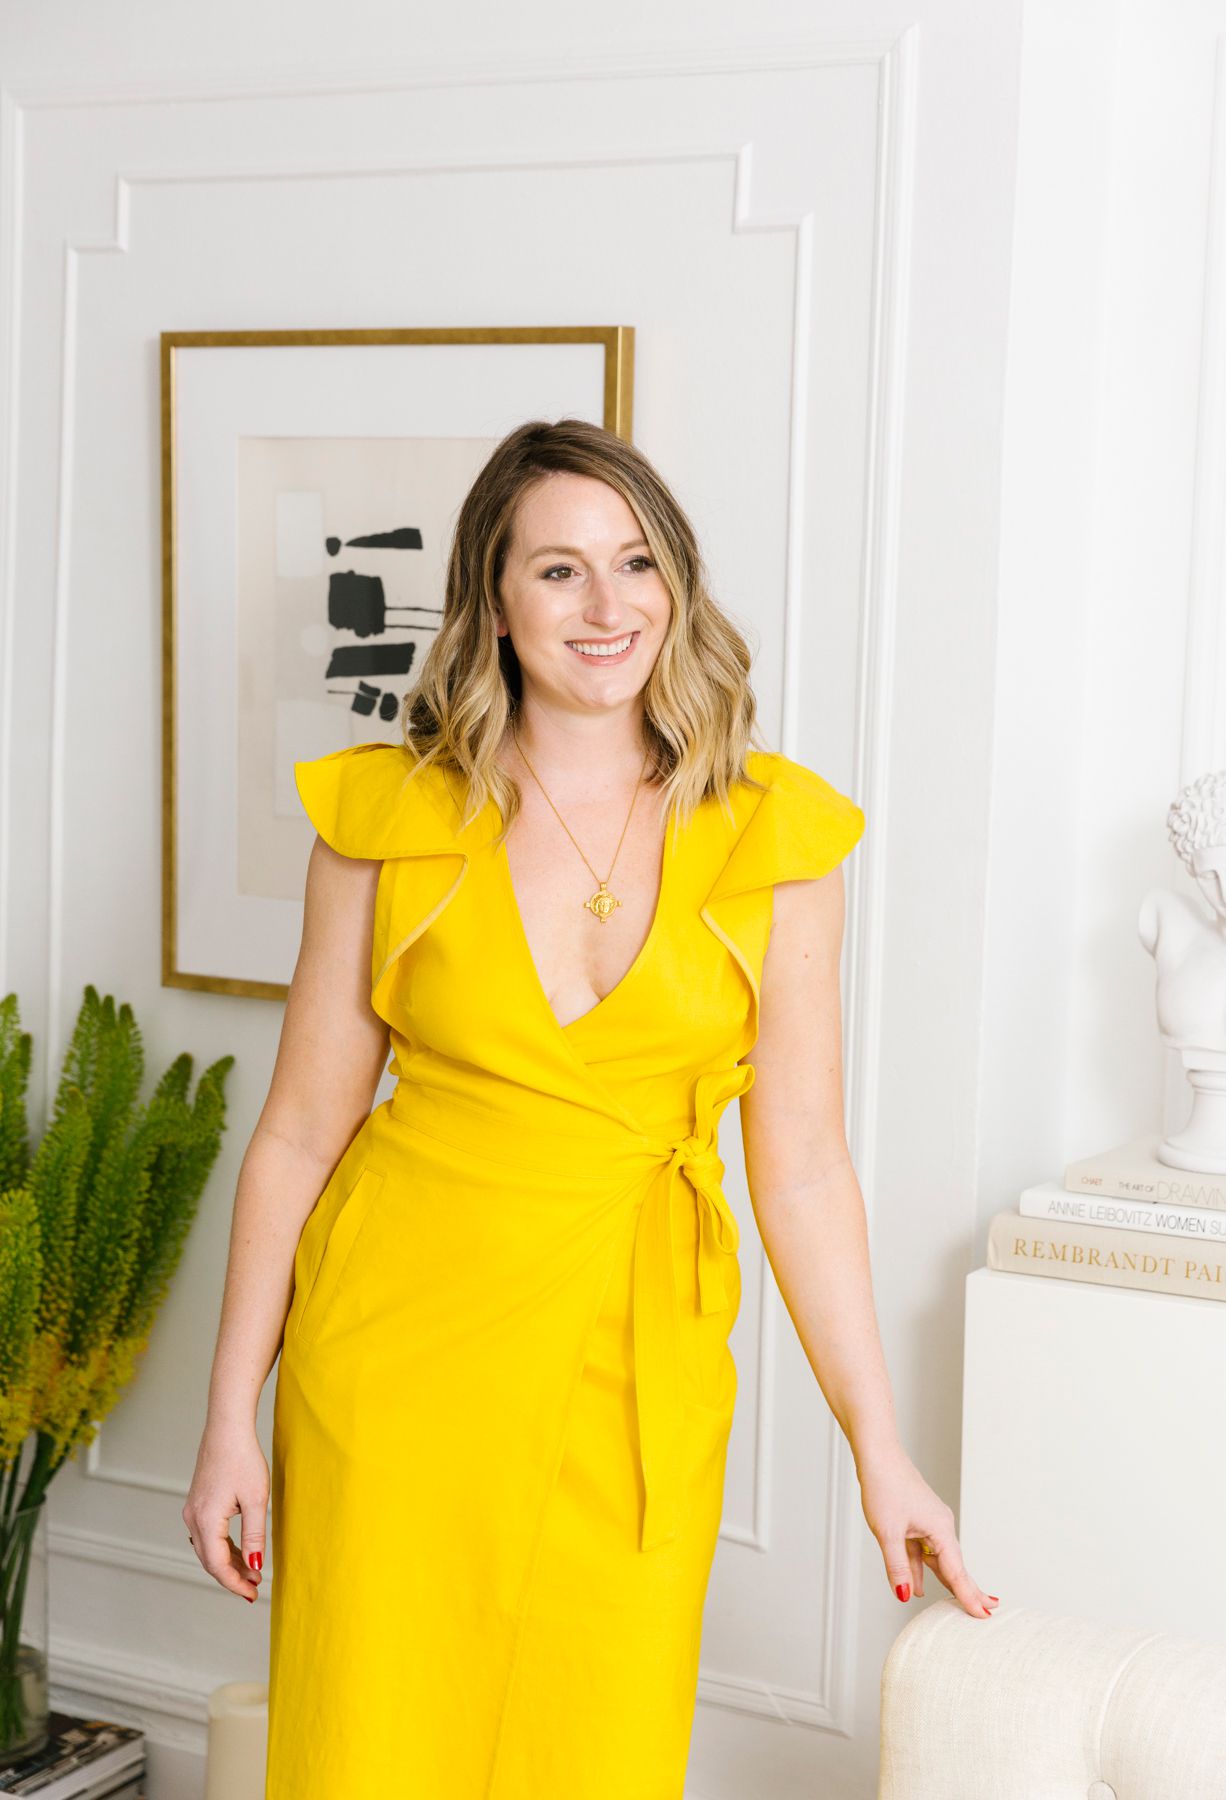 shelby in bright yellow dress standing in nyc apartment